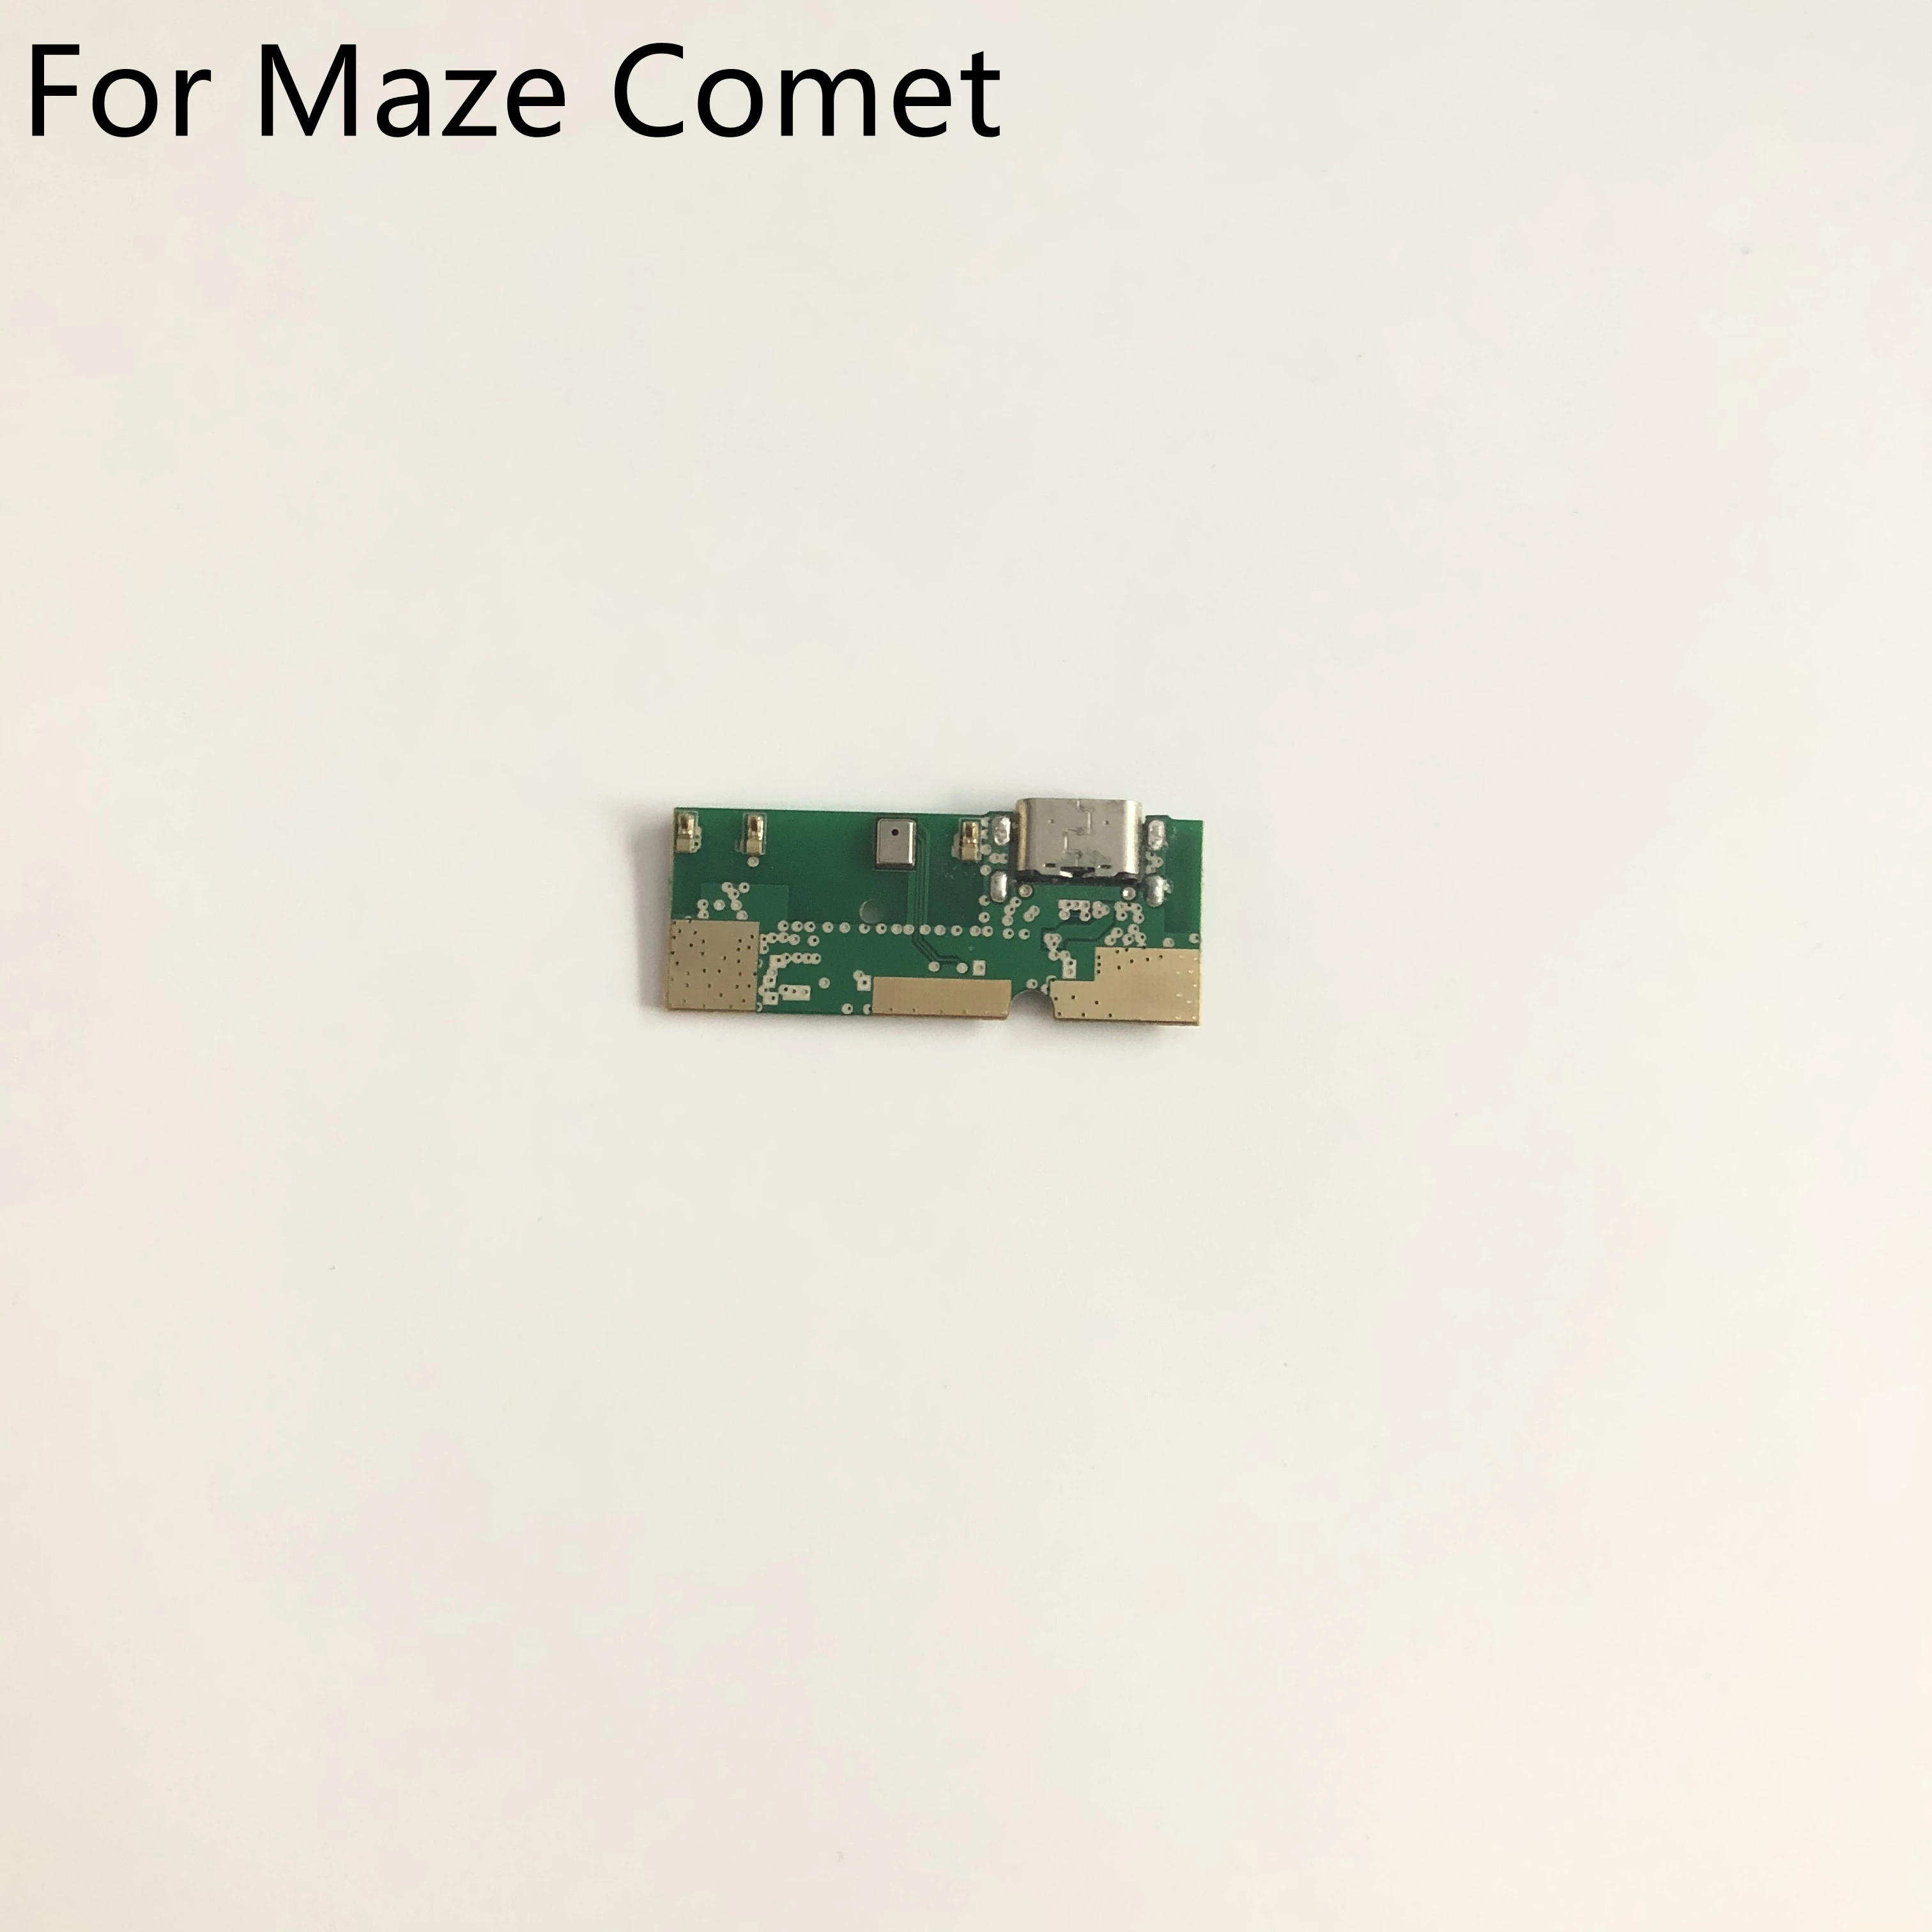 

Maze Comet USB Plug Charge Board For Maze Comet MTK6750T Octa Core 5.70" 720 x 1440 Smartphone Free Shipping